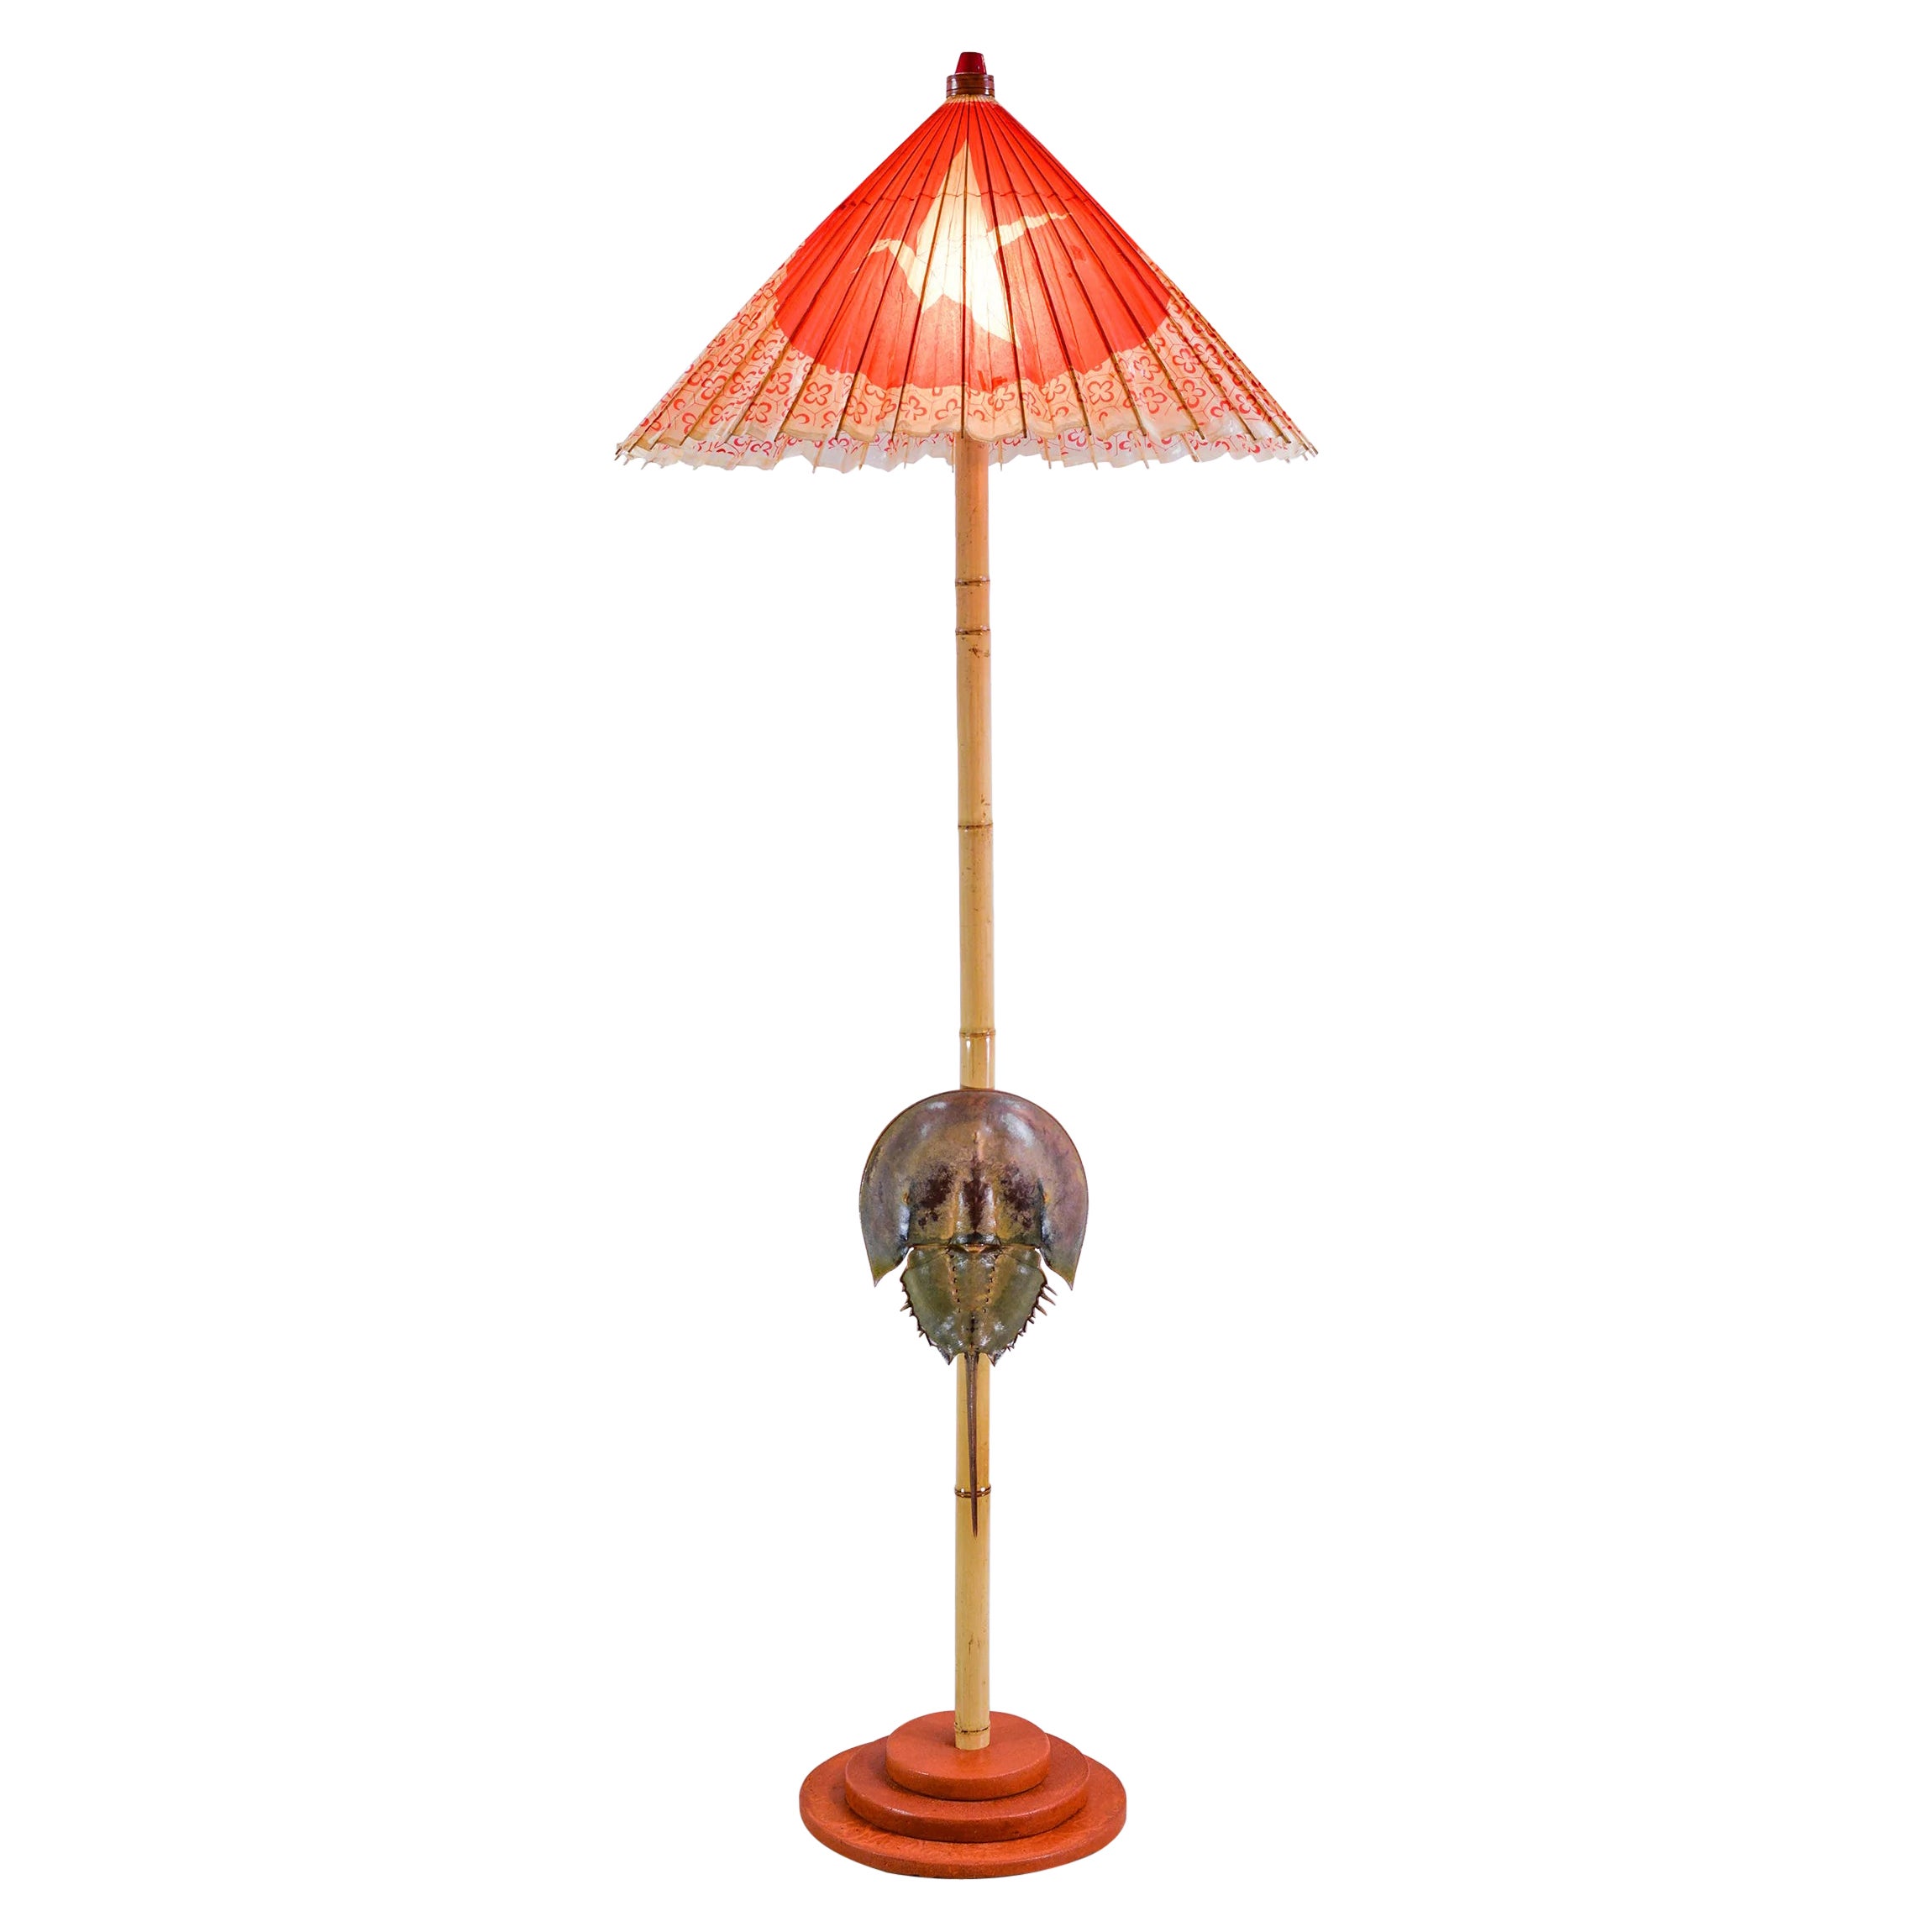 Jumbo Horseshoe Crab Lamp with Antique Parasol Shade by Christopher Tennant For Sale